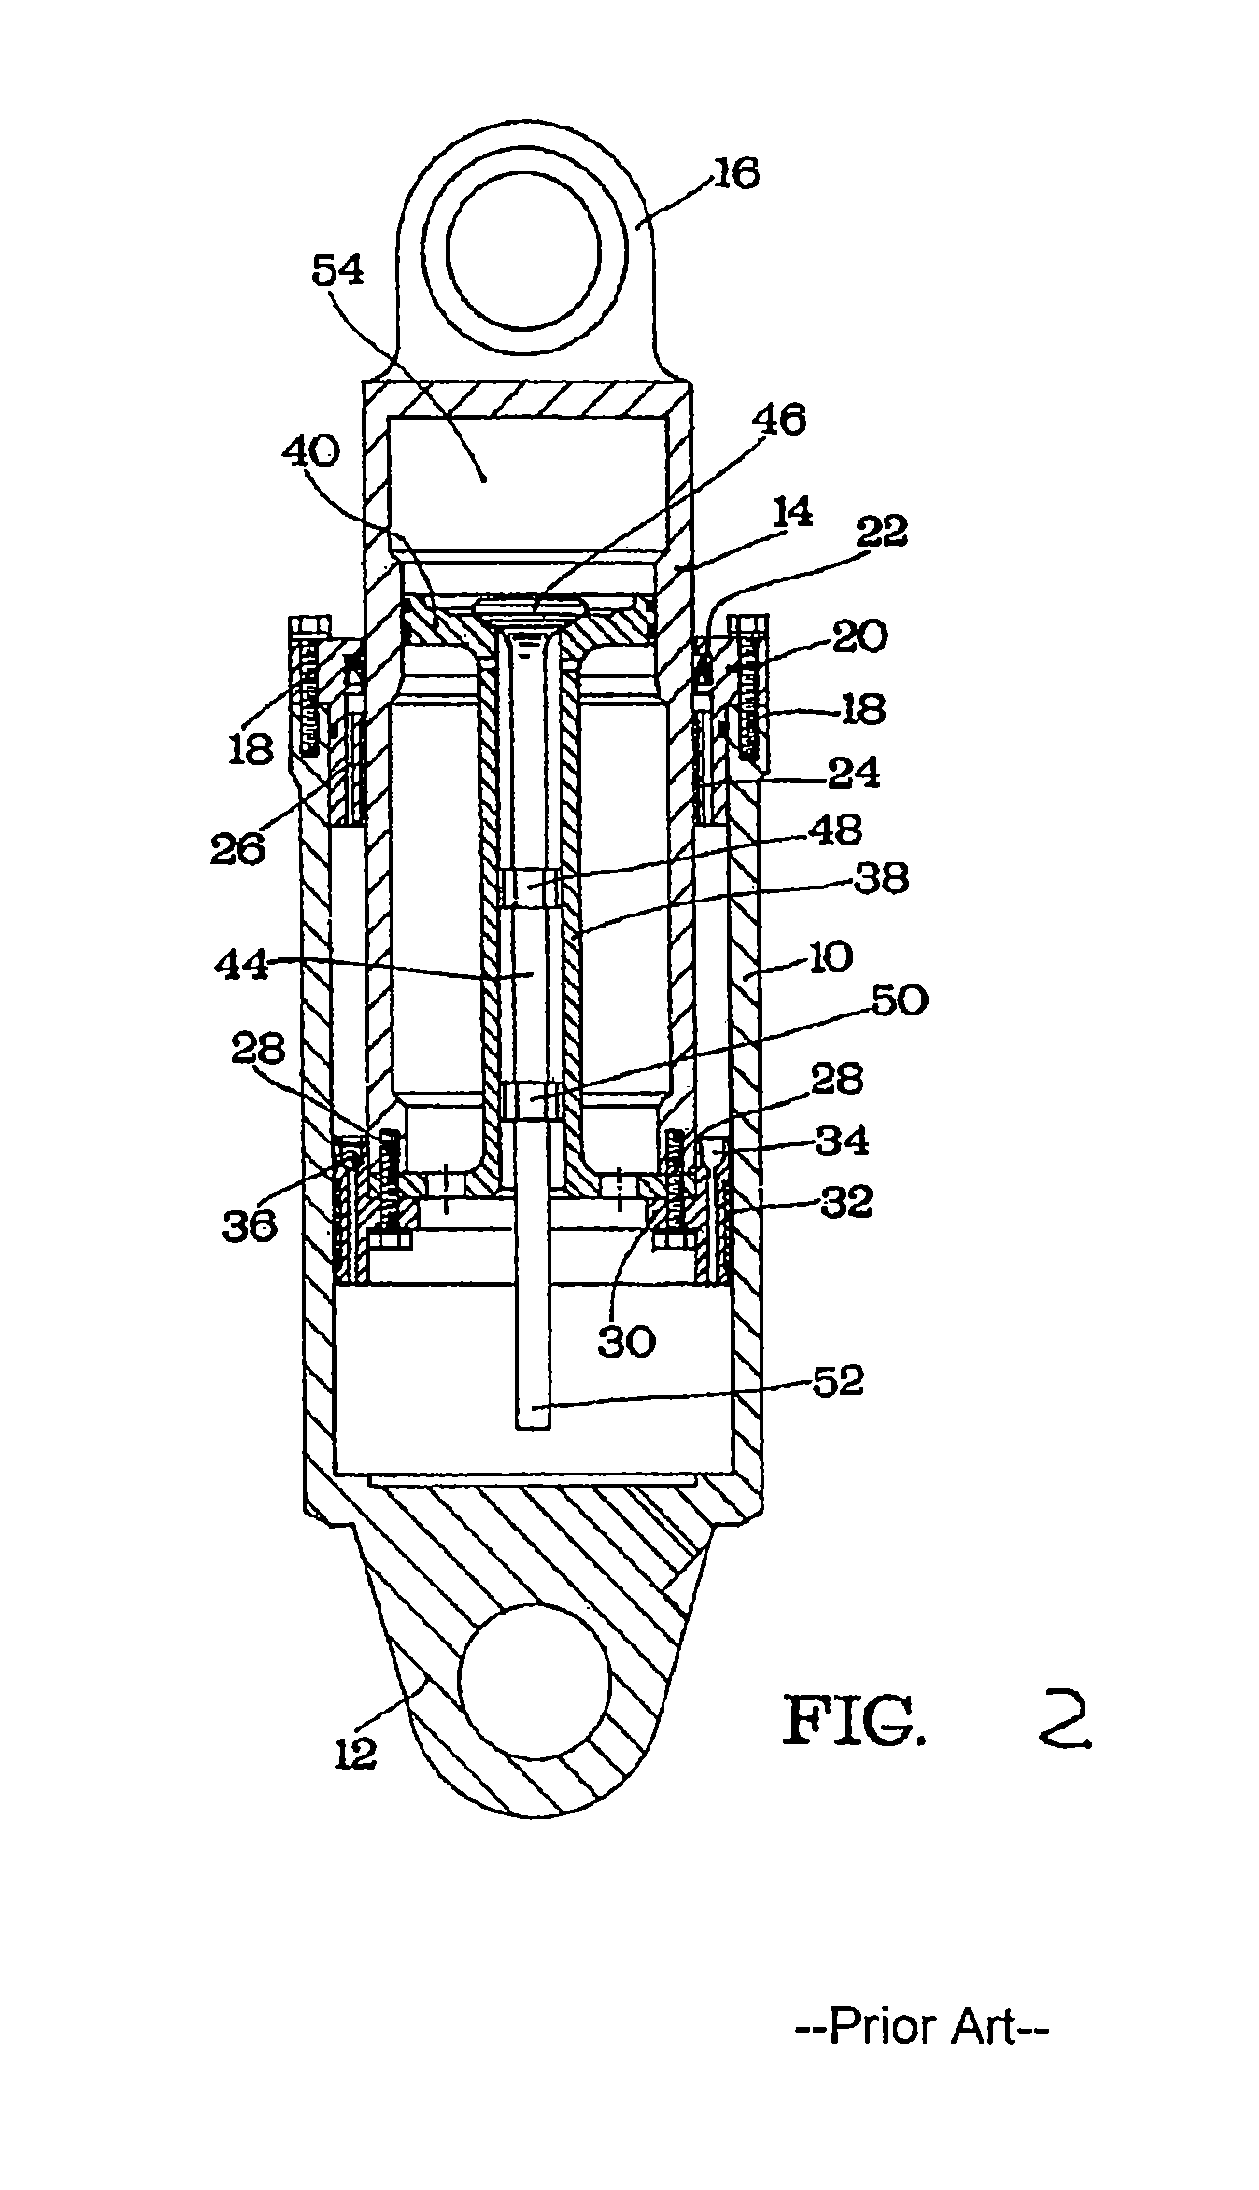 Methods and apparatus for suspending vehicles